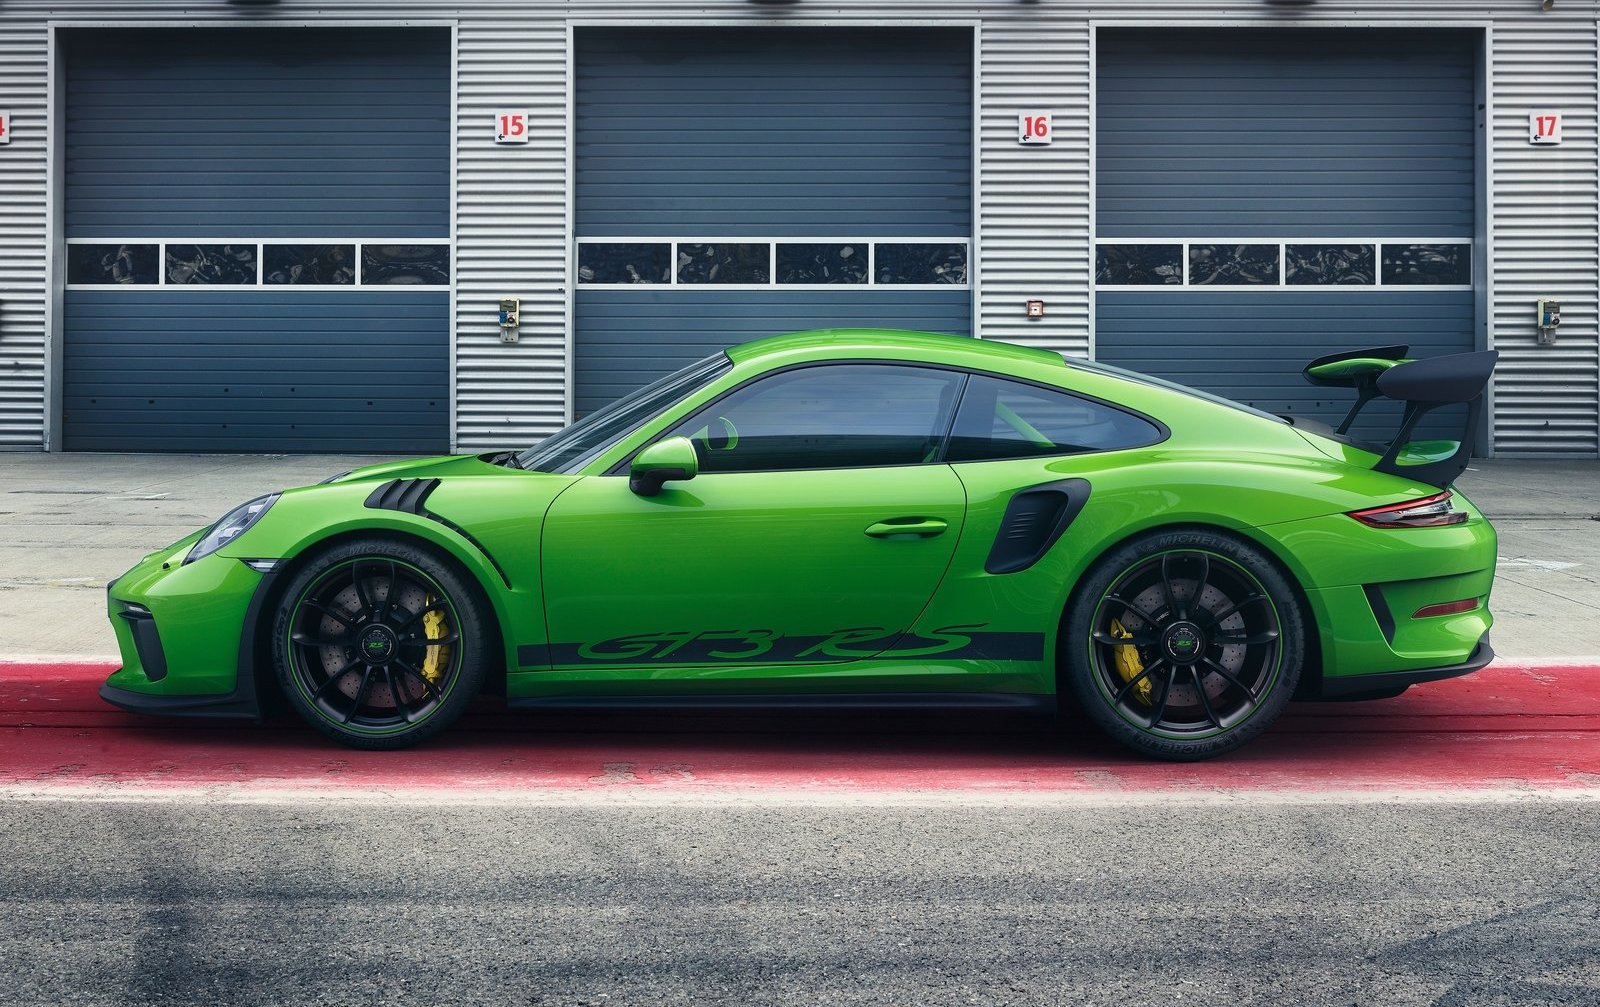 2018 Porsche 911 GT3 RS revealed, on sale from $416,500 – PerformanceDrive